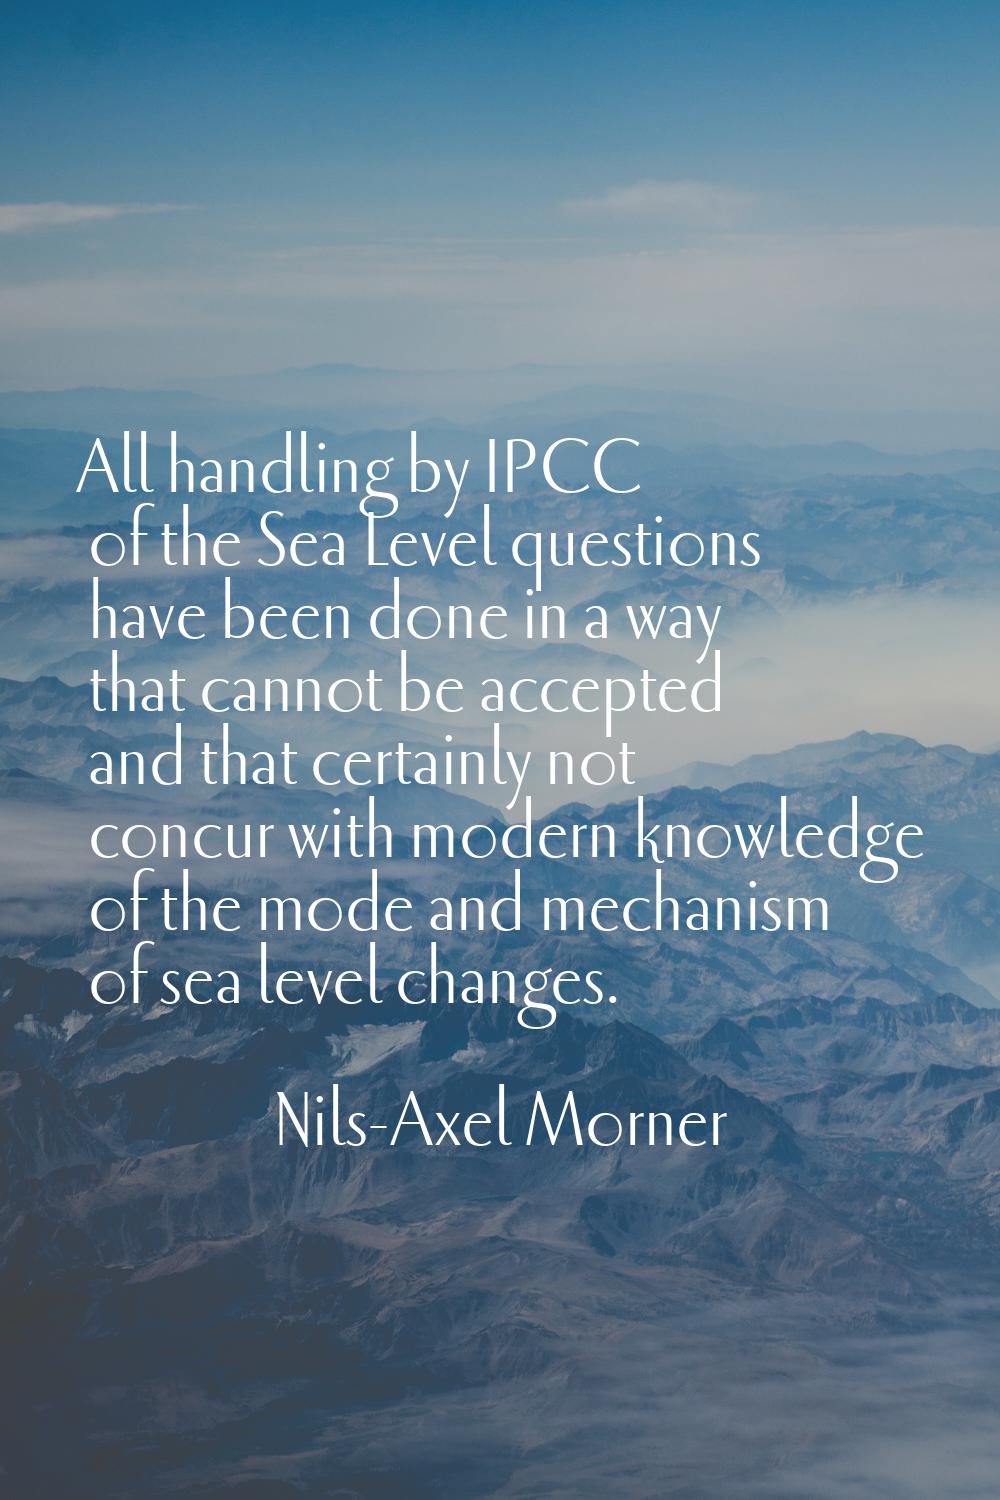 All handling by IPCC of the Sea Level questions have been done in a way that cannot be accepted and